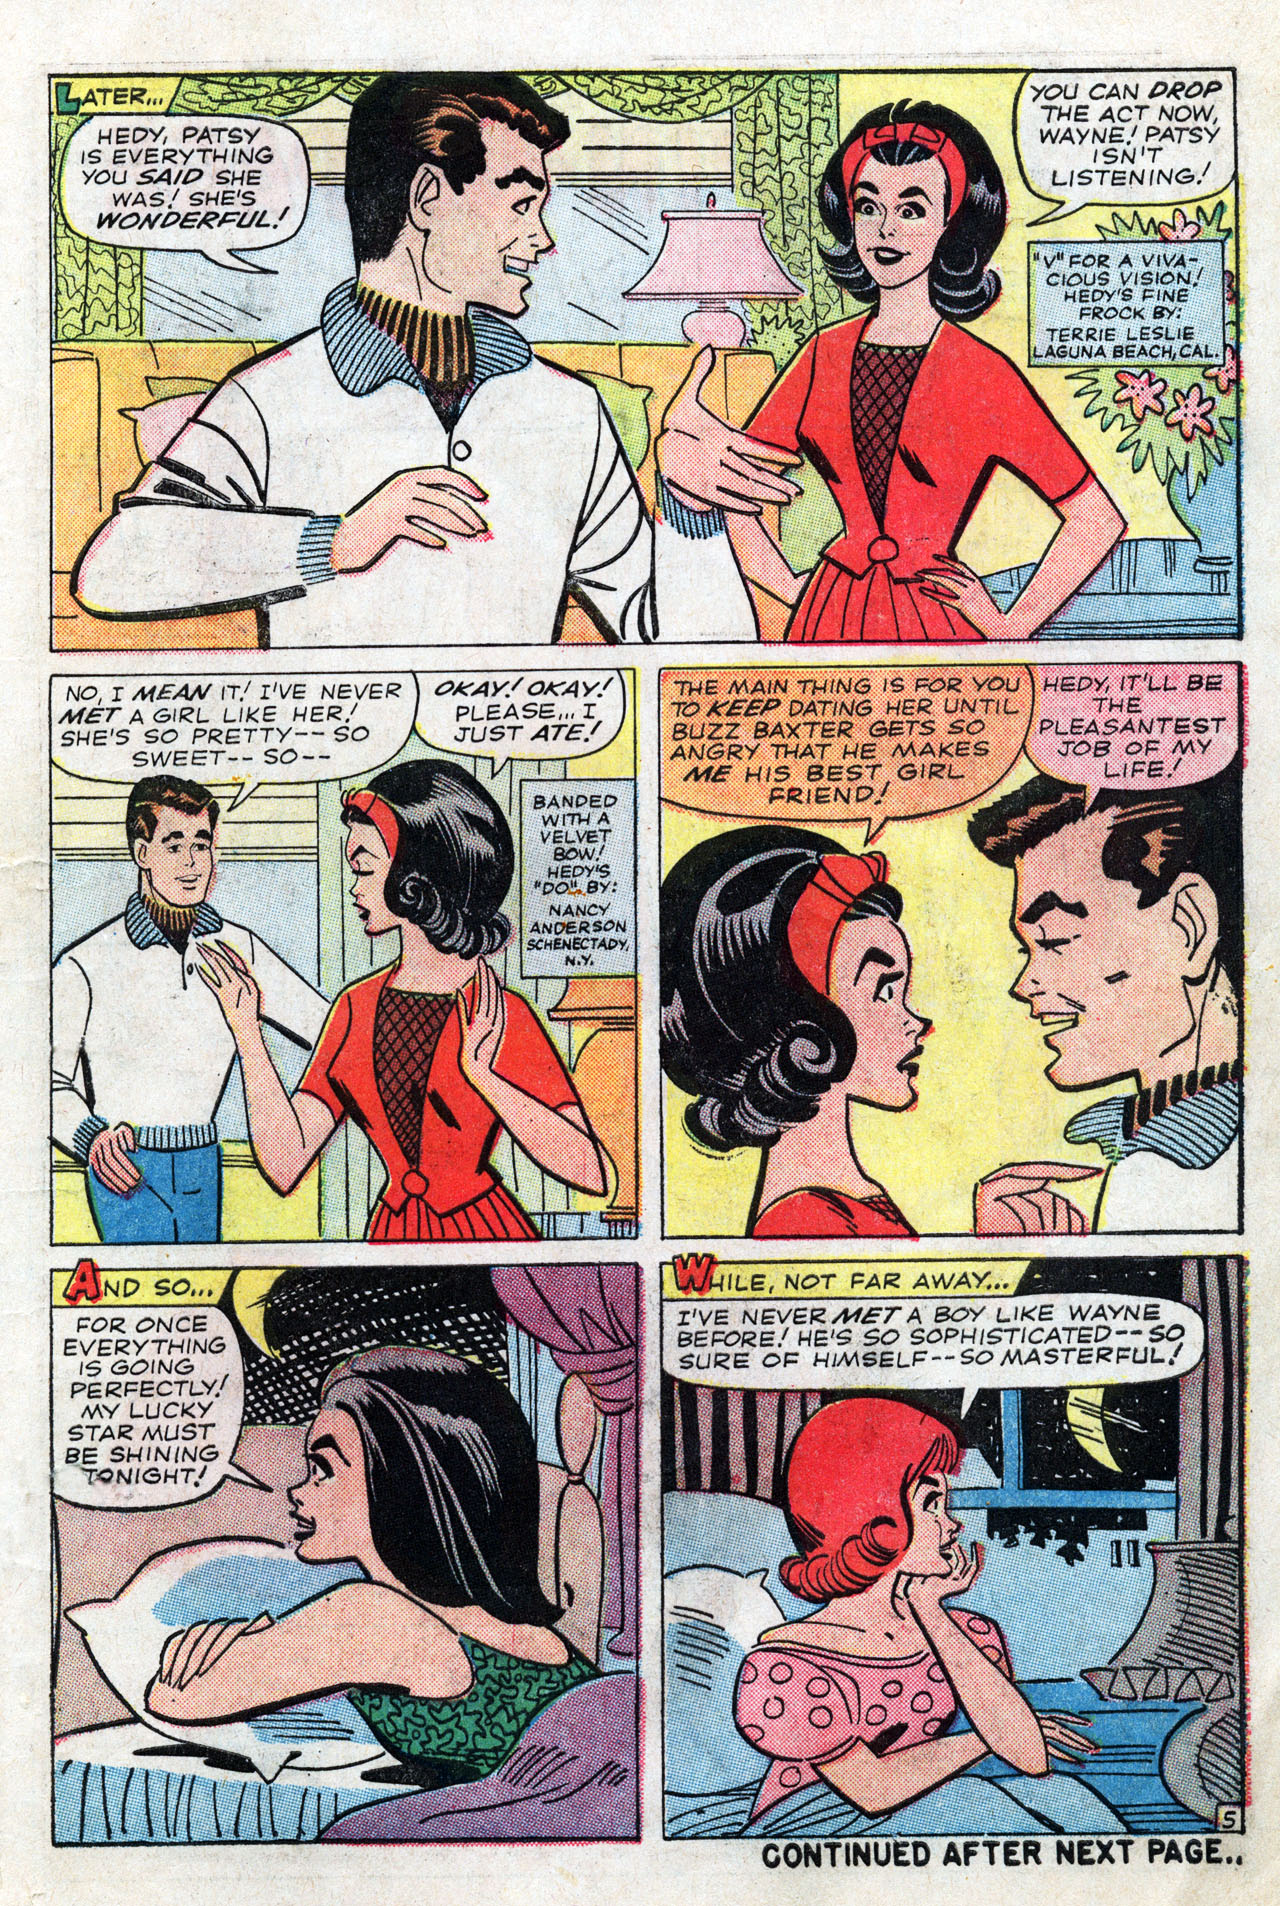 Read online Patsy and Hedy comic -  Issue #93 - 7